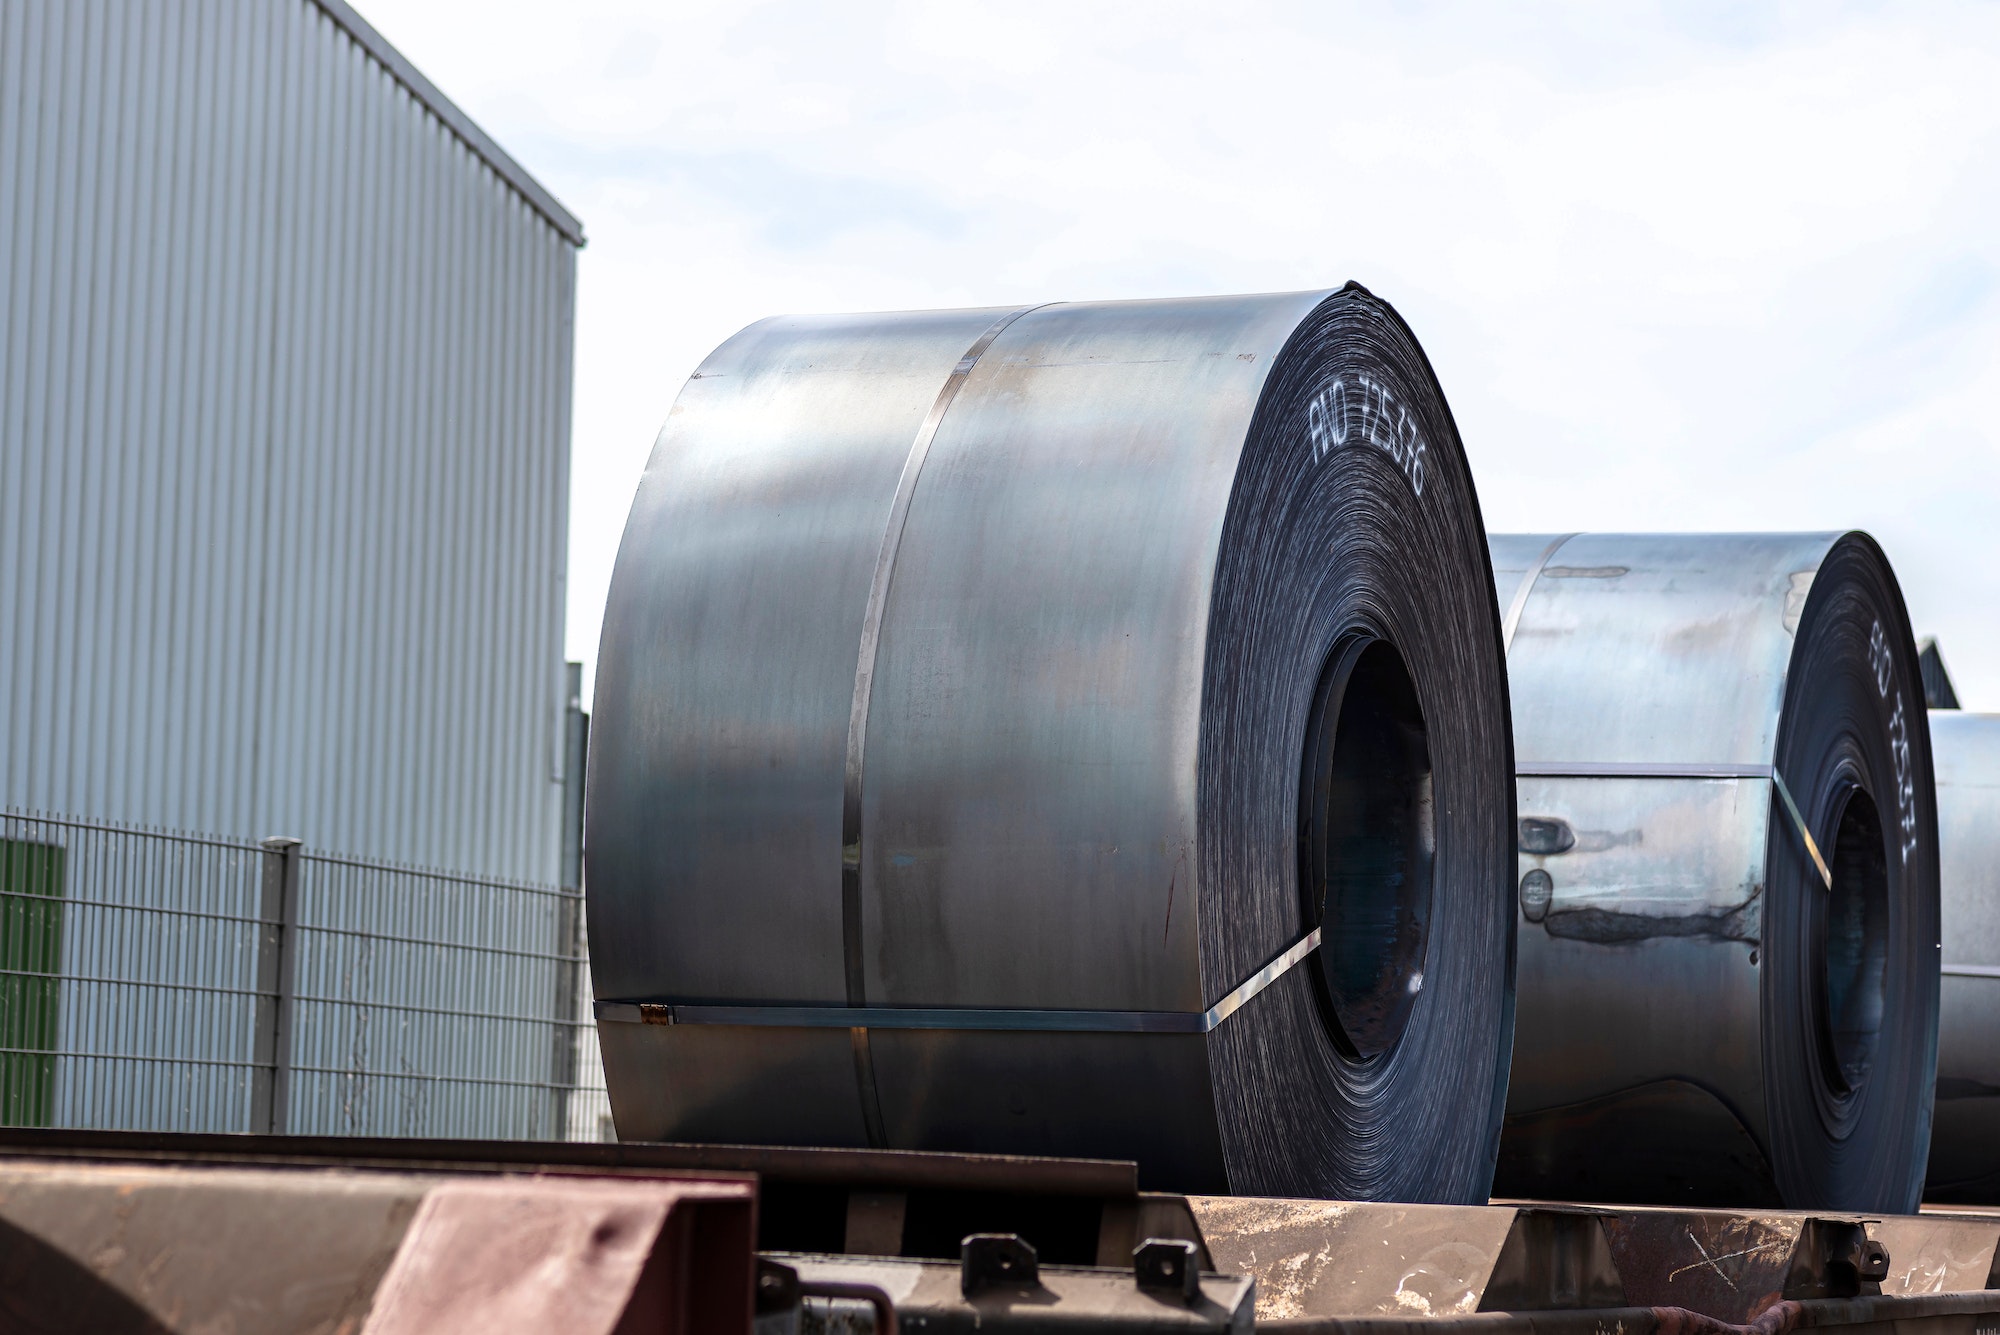 Large rolls of sheet metal lying on a freight wagon pulled by locomotives.